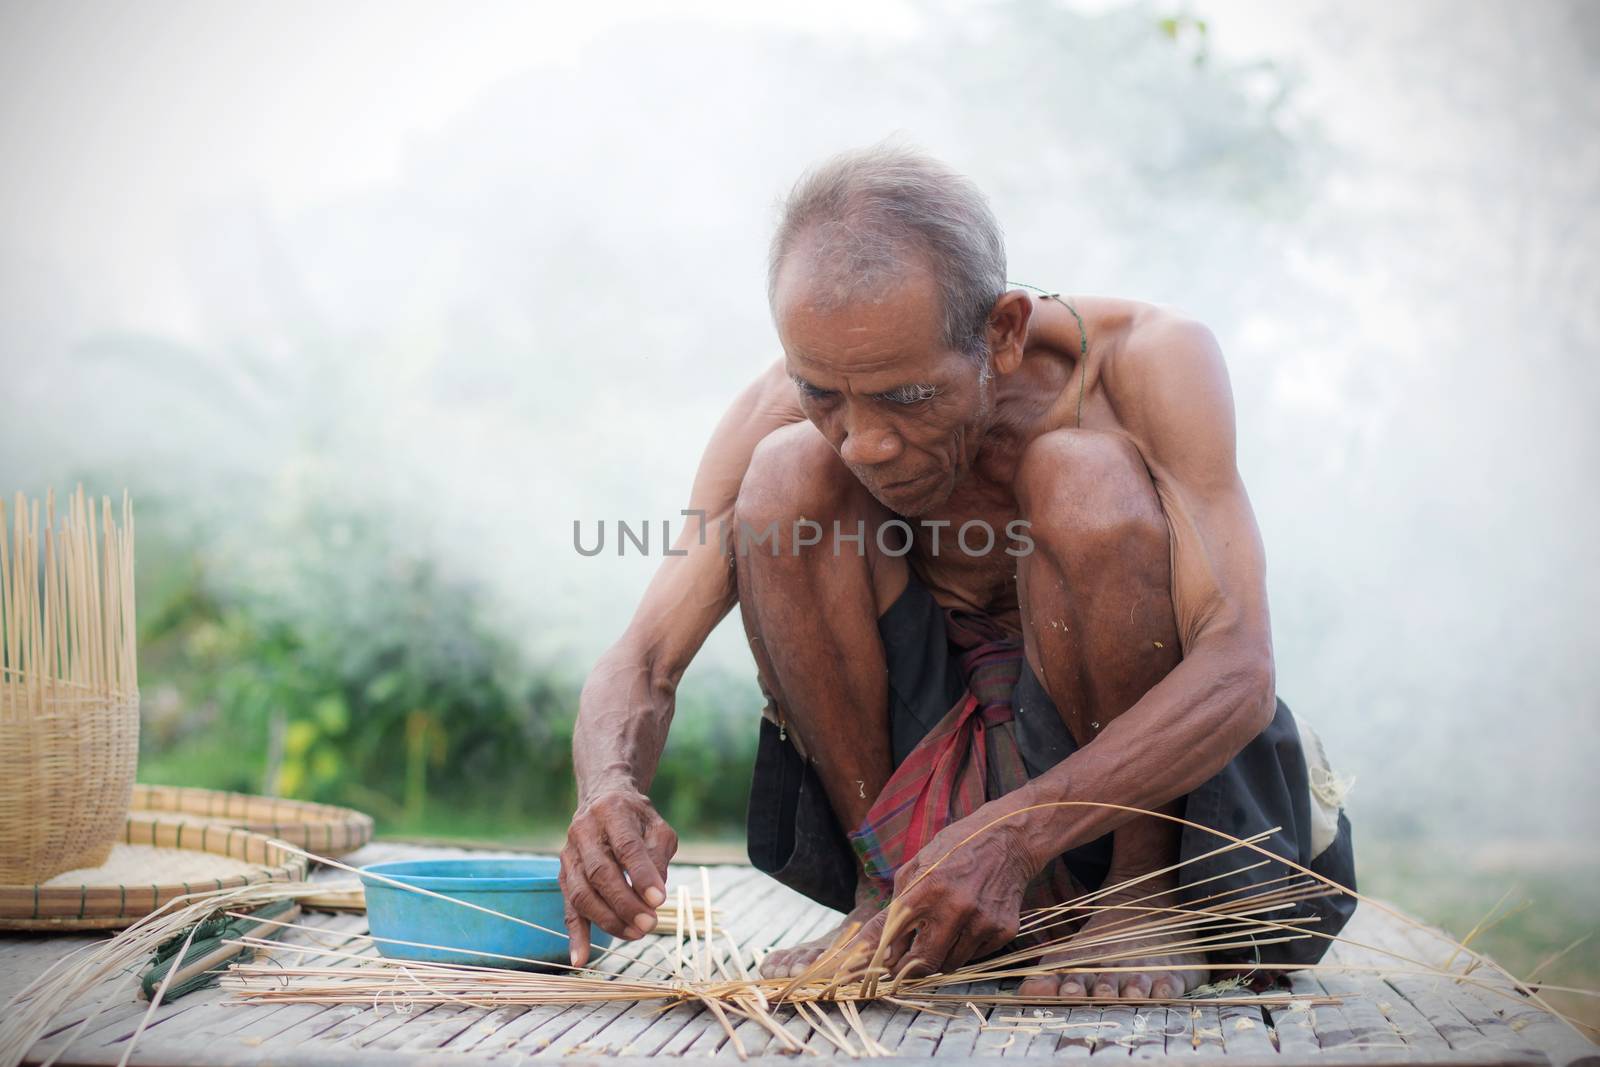 Older people with basketry. by start08